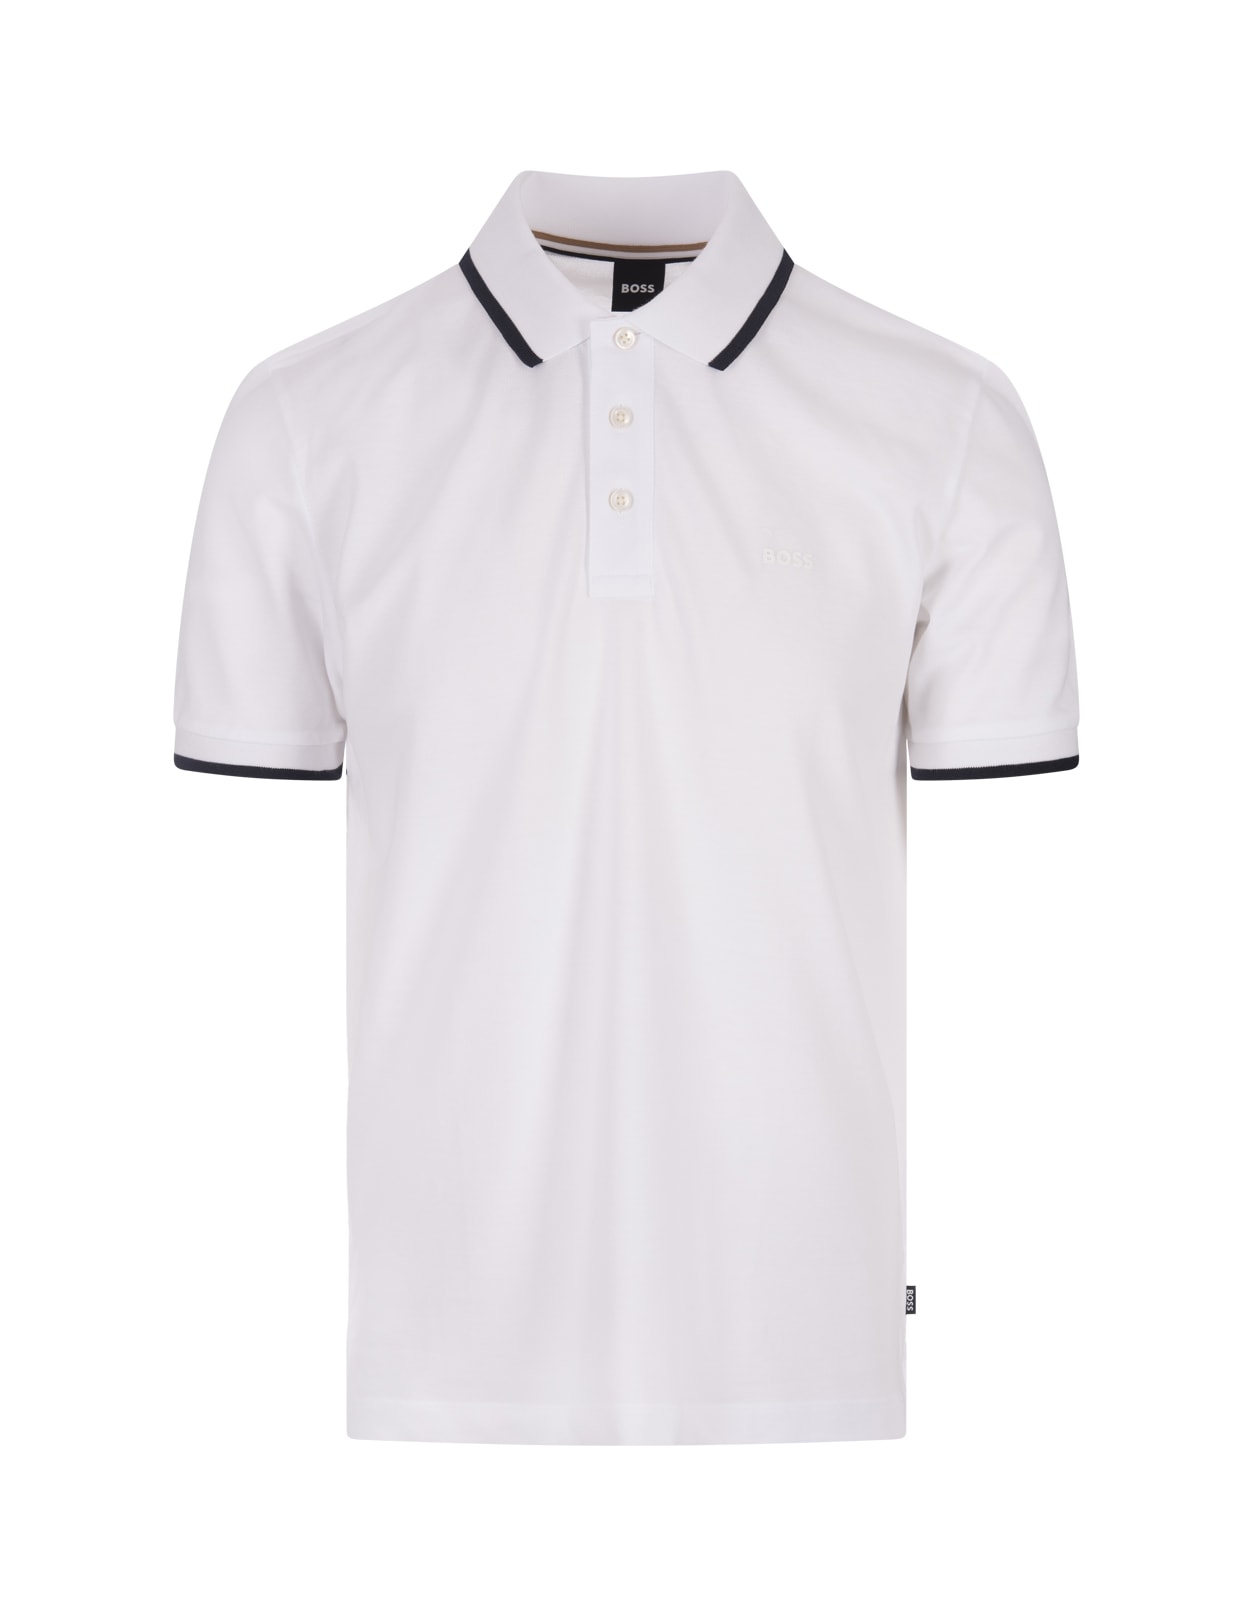 White Slim Fit Polo Shirt With Striped Collar